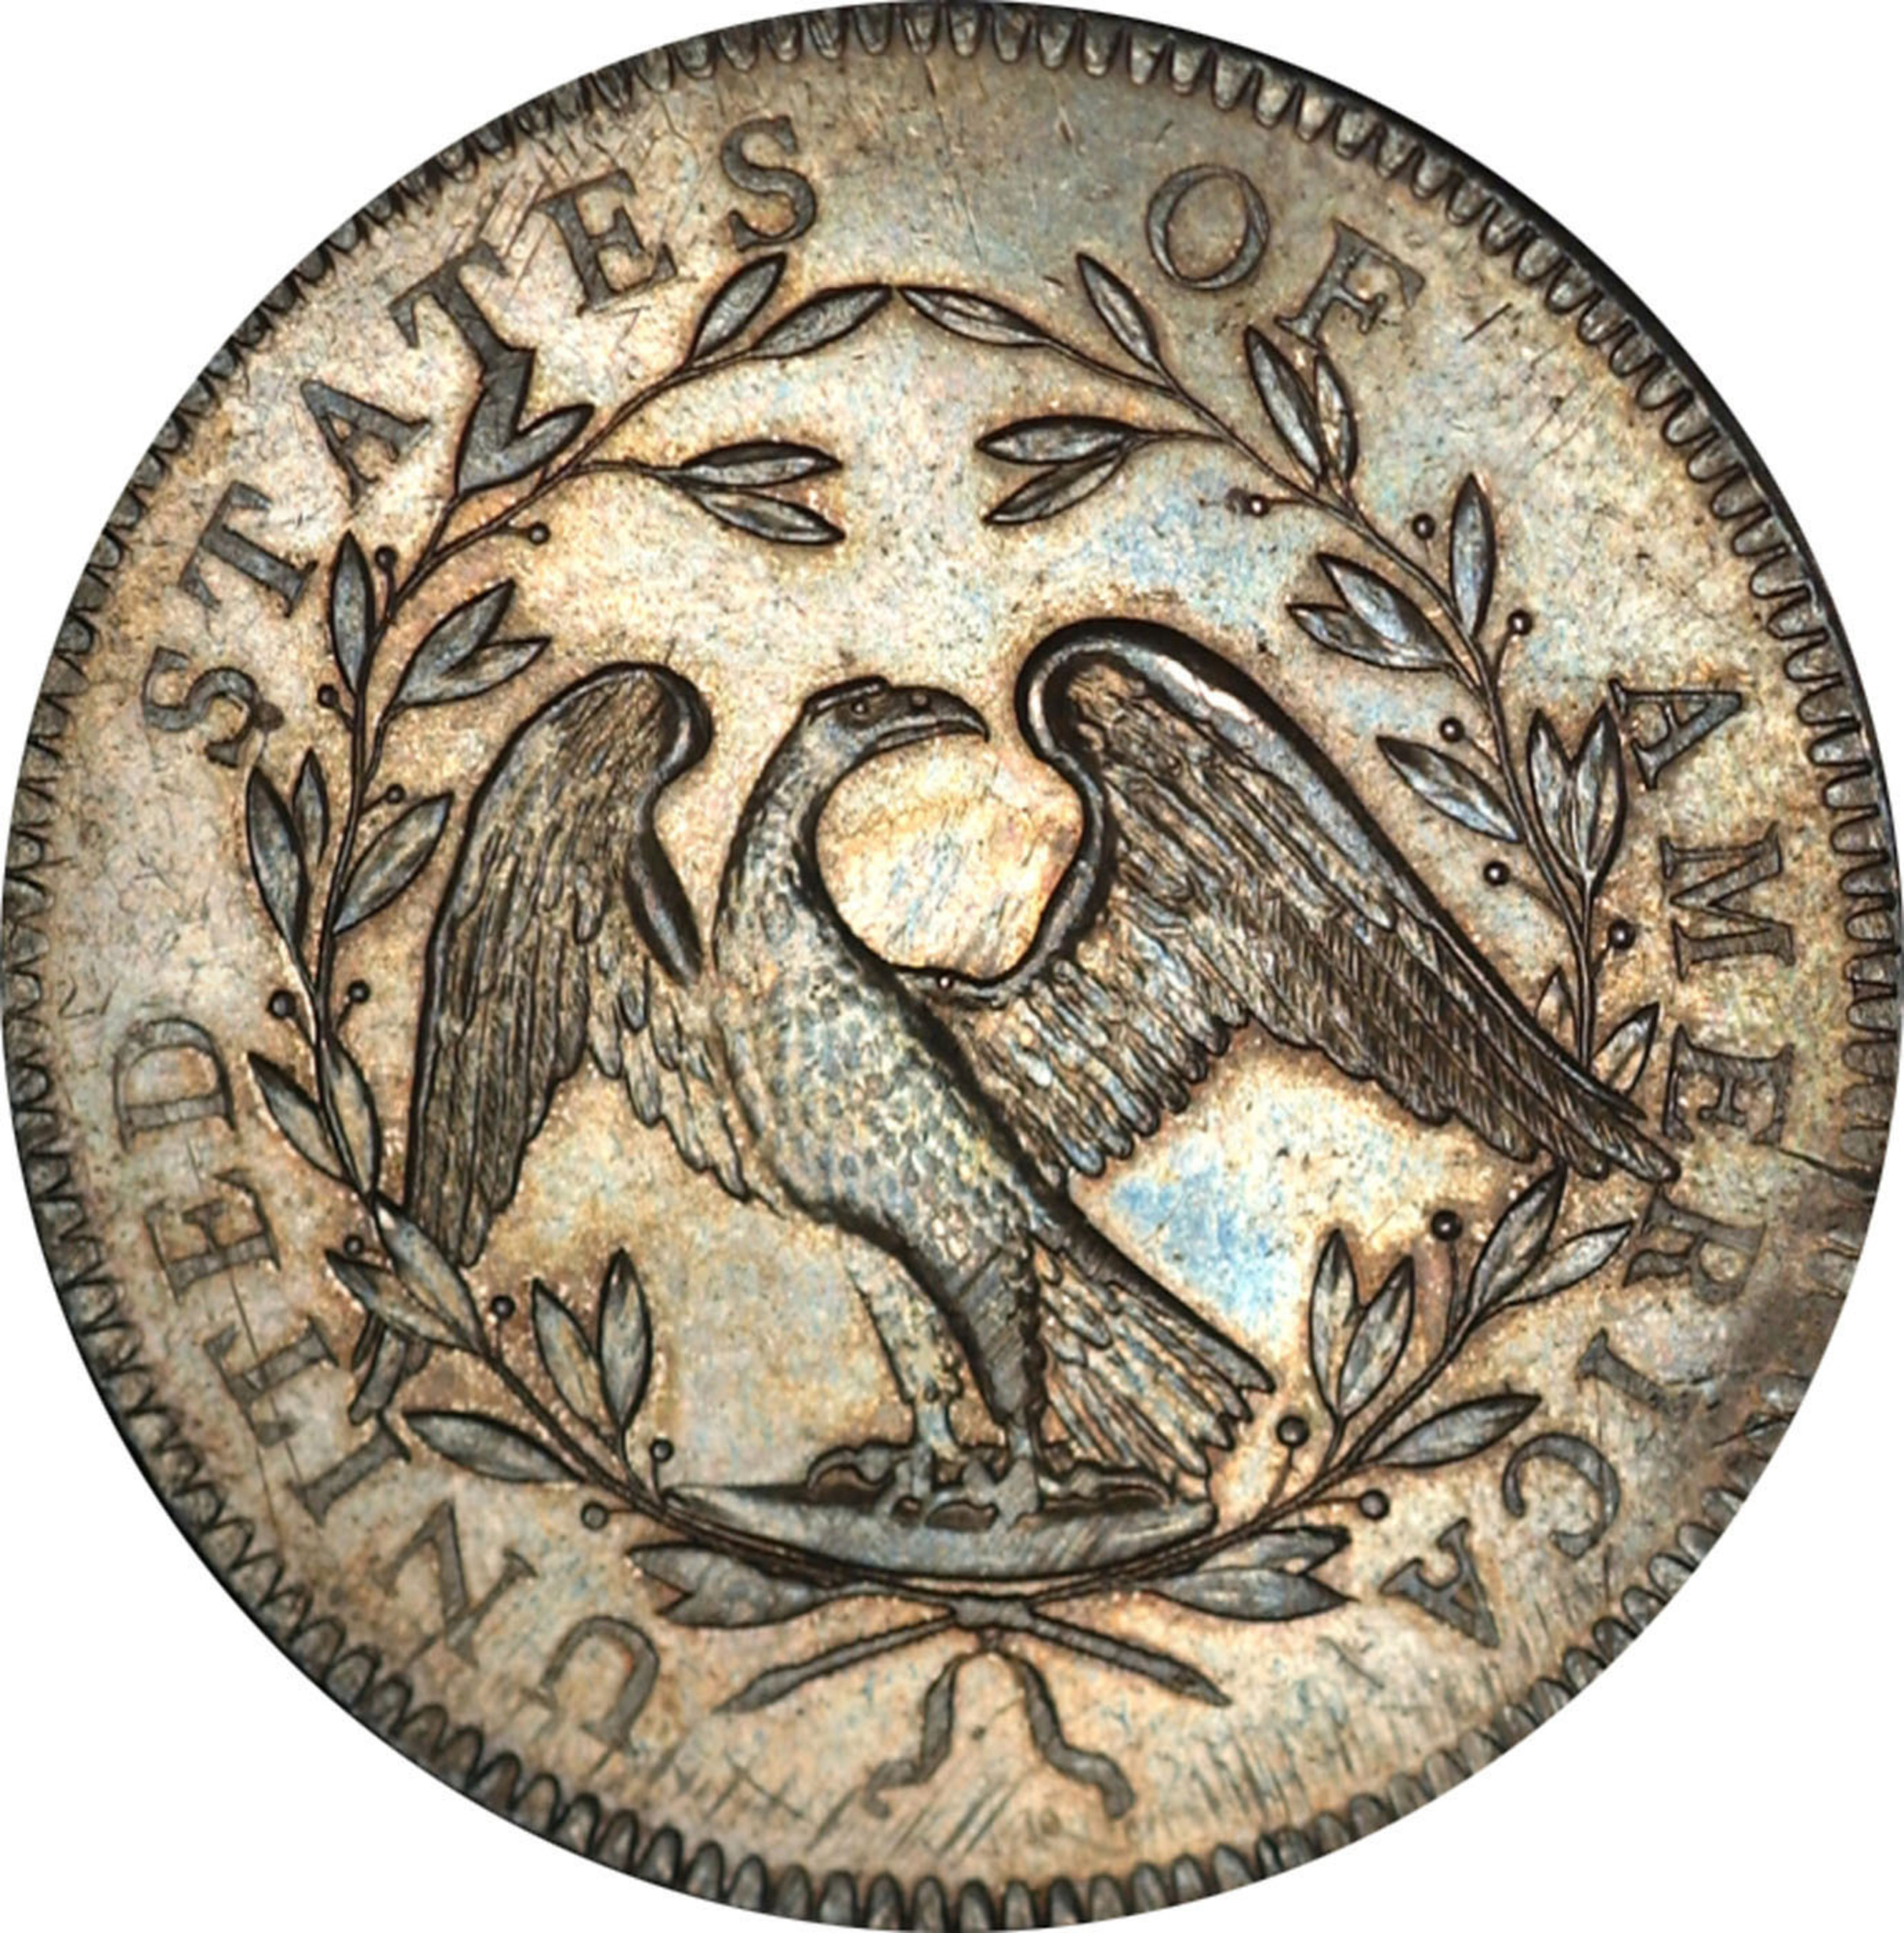 Leading rare coin auctioneer Stack's Bowers Galleries conducted one of the most highly-anticipated events in numismatic history on January 24, 2013, with the sale of the record-setting Cardinal Collection. The highlight of the evening was the $10,016,875 sale of the coveted 1794 Flowing Hair silver dollar, a superb Gem Specimen example, the finest known to exist. This set a new world-record price for any coin. (PRNewsFoto/Stack's Bowers Galleries) (PRNewsFoto/STACKS BOWERS GALLERIES)